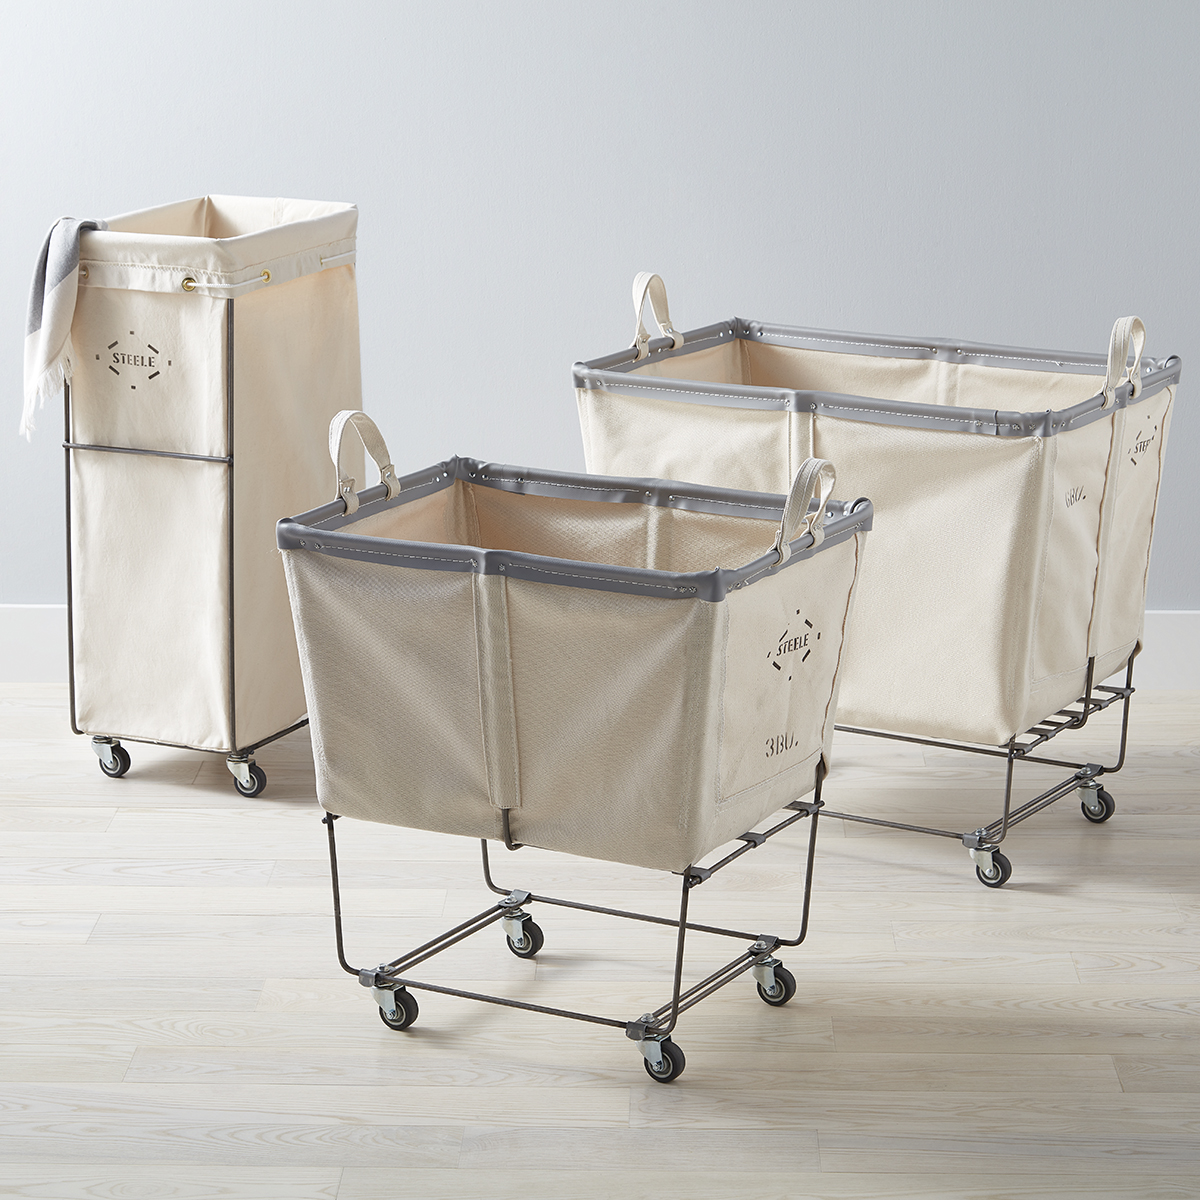 Steele Canvas Natural Sorting Hamper | The Container Store